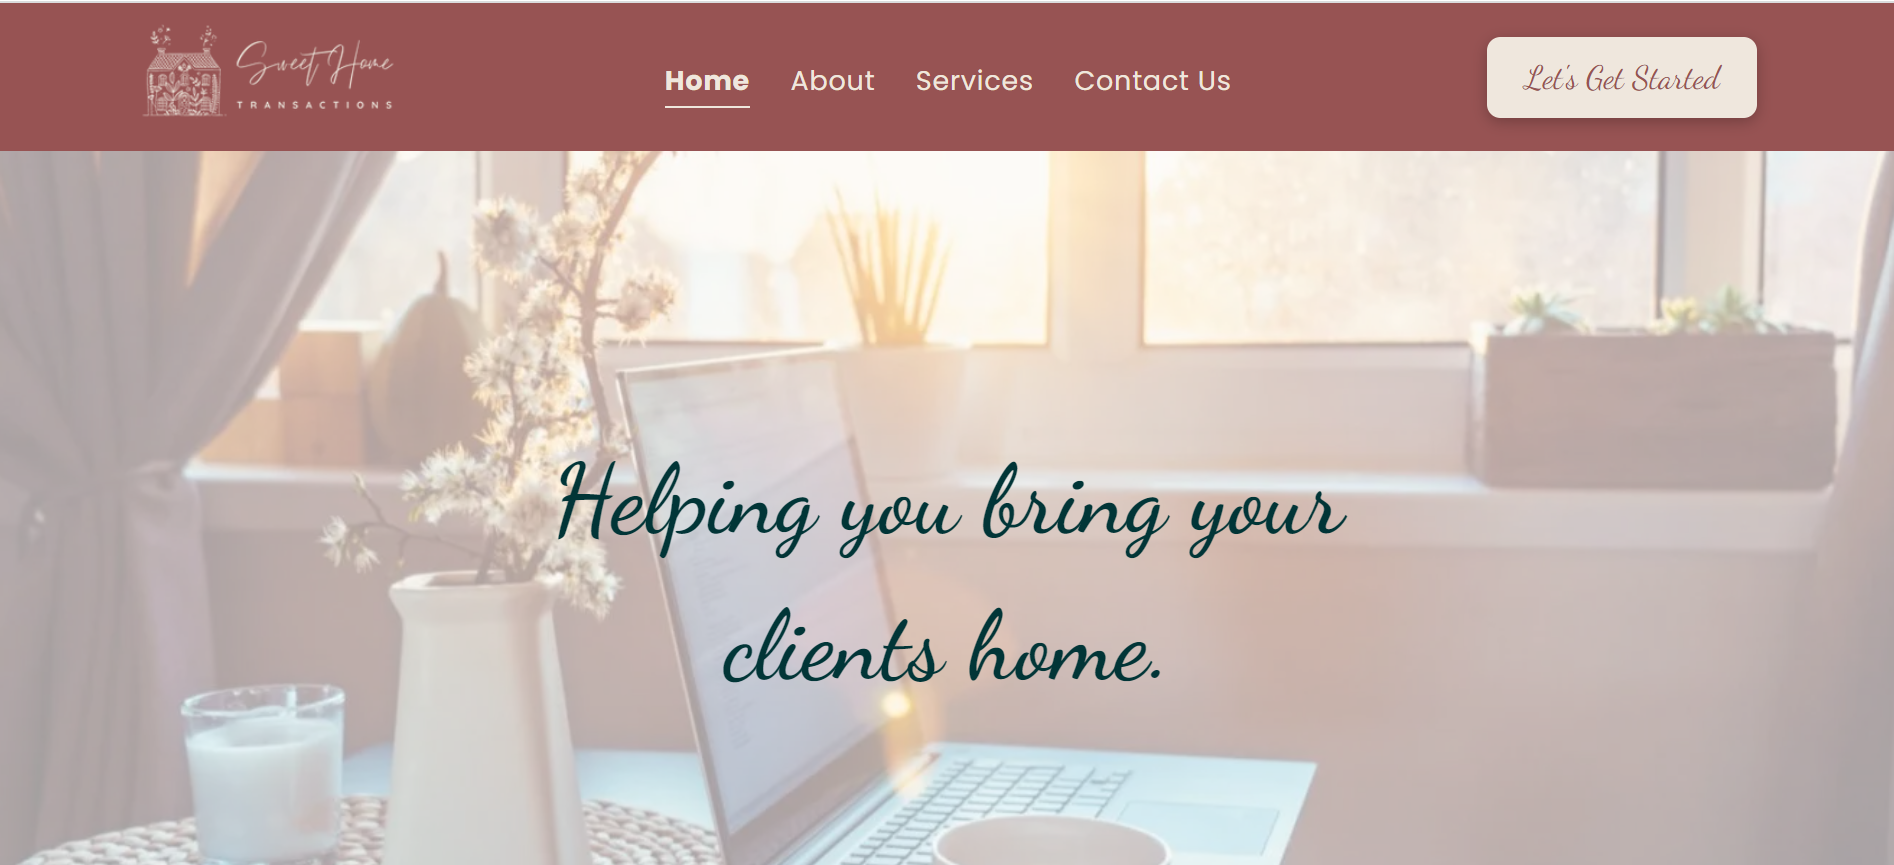 Screenshot of the top part of the Home Page on the Sweet Home Transactions website